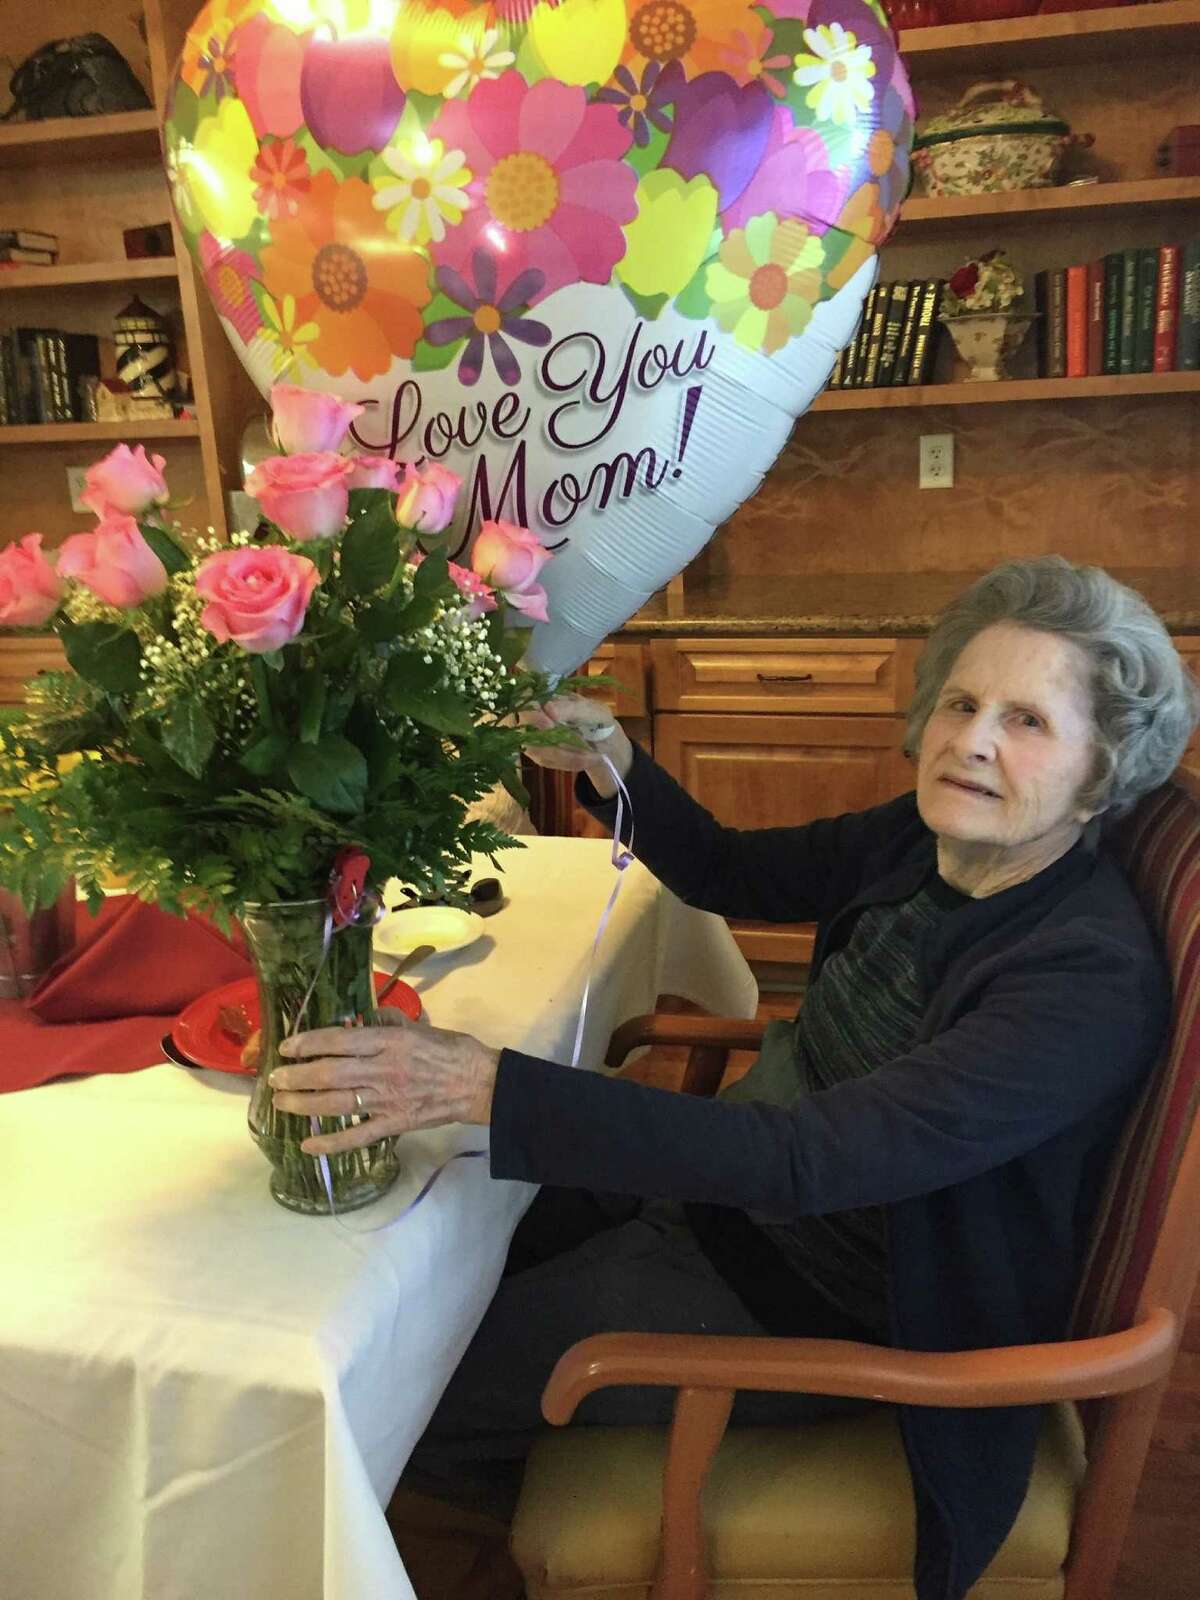 84-year-old Mary Sue Ferguson, a Parkway Place resident in the memory care area, celebrates birthday with her family at the senior living community.